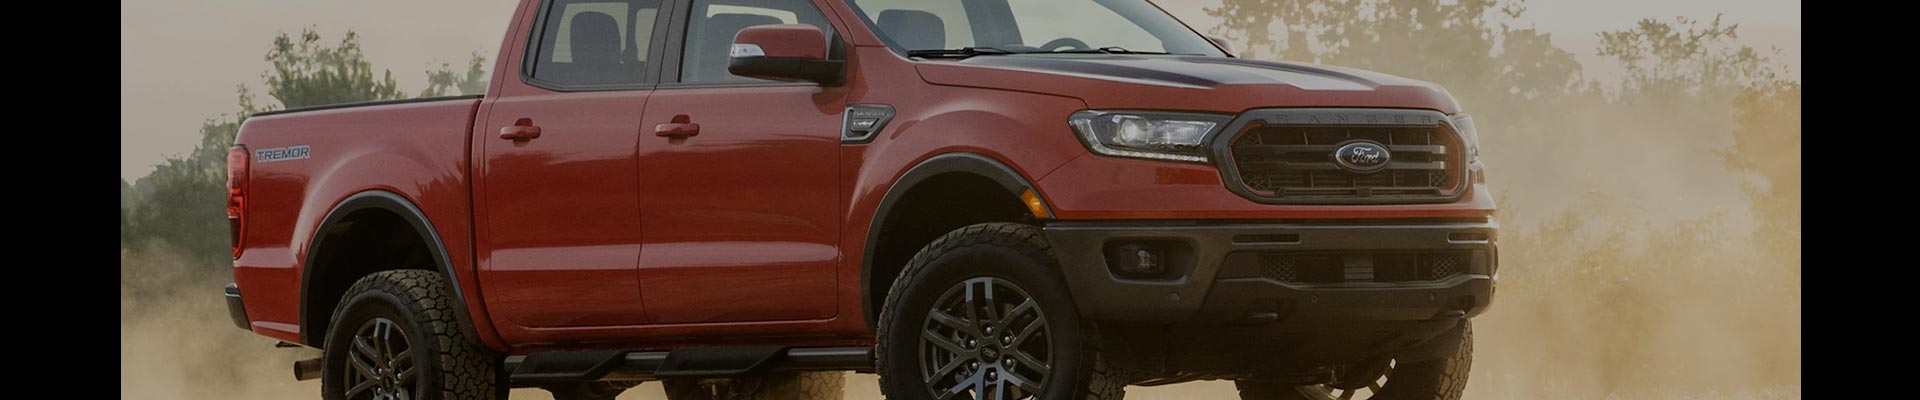 Shop Replacement and OEM 2011 Ford Ranger Parts with Discounted Price on the Net